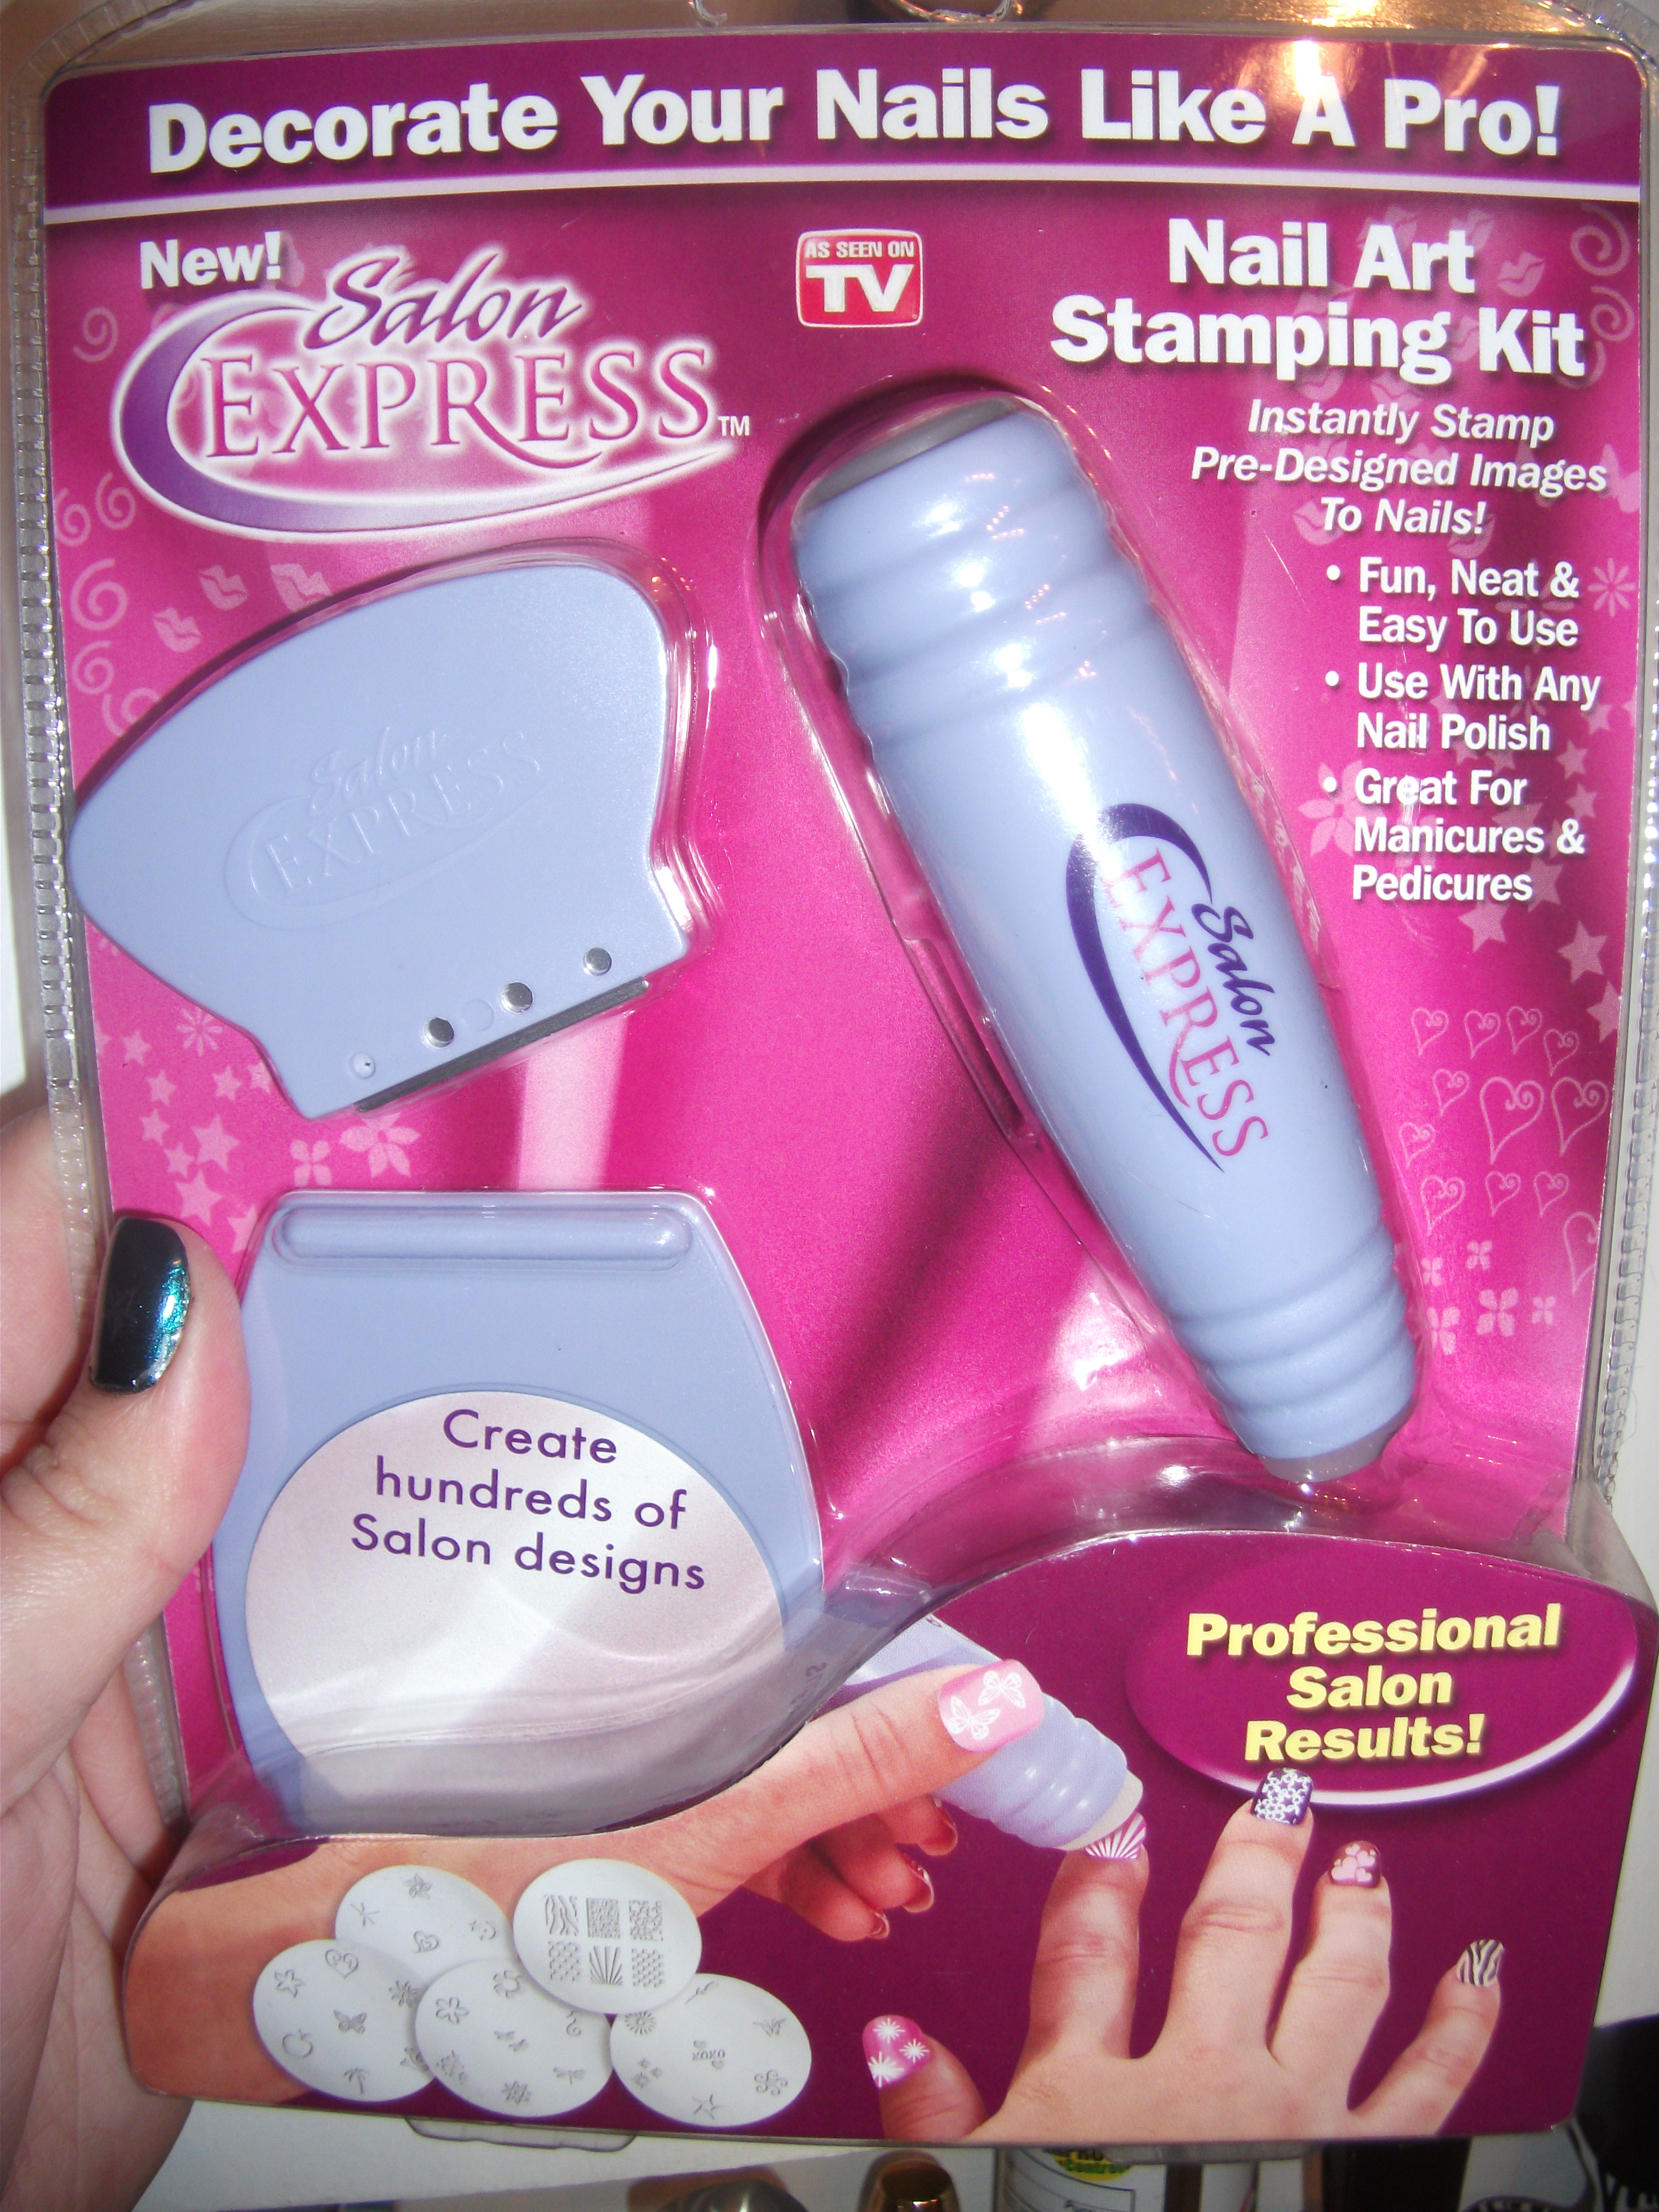 Here's what the Salon Express nail stamping kit looks like: